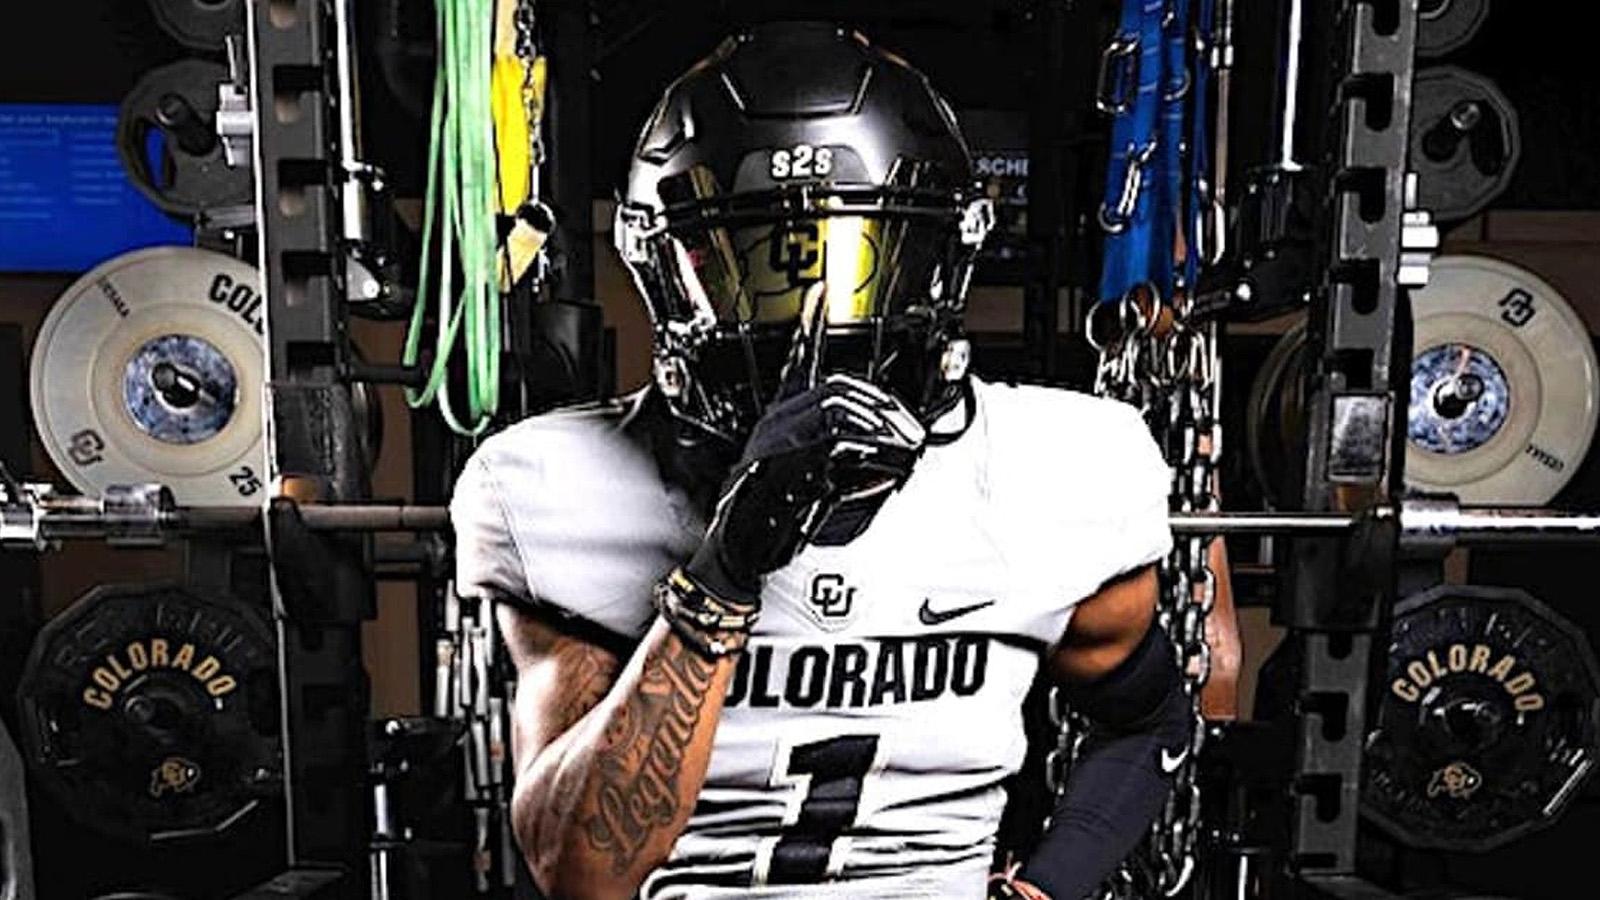 Deion Sanders' Top Recruit Goes Viral With Arms As Big As Trees